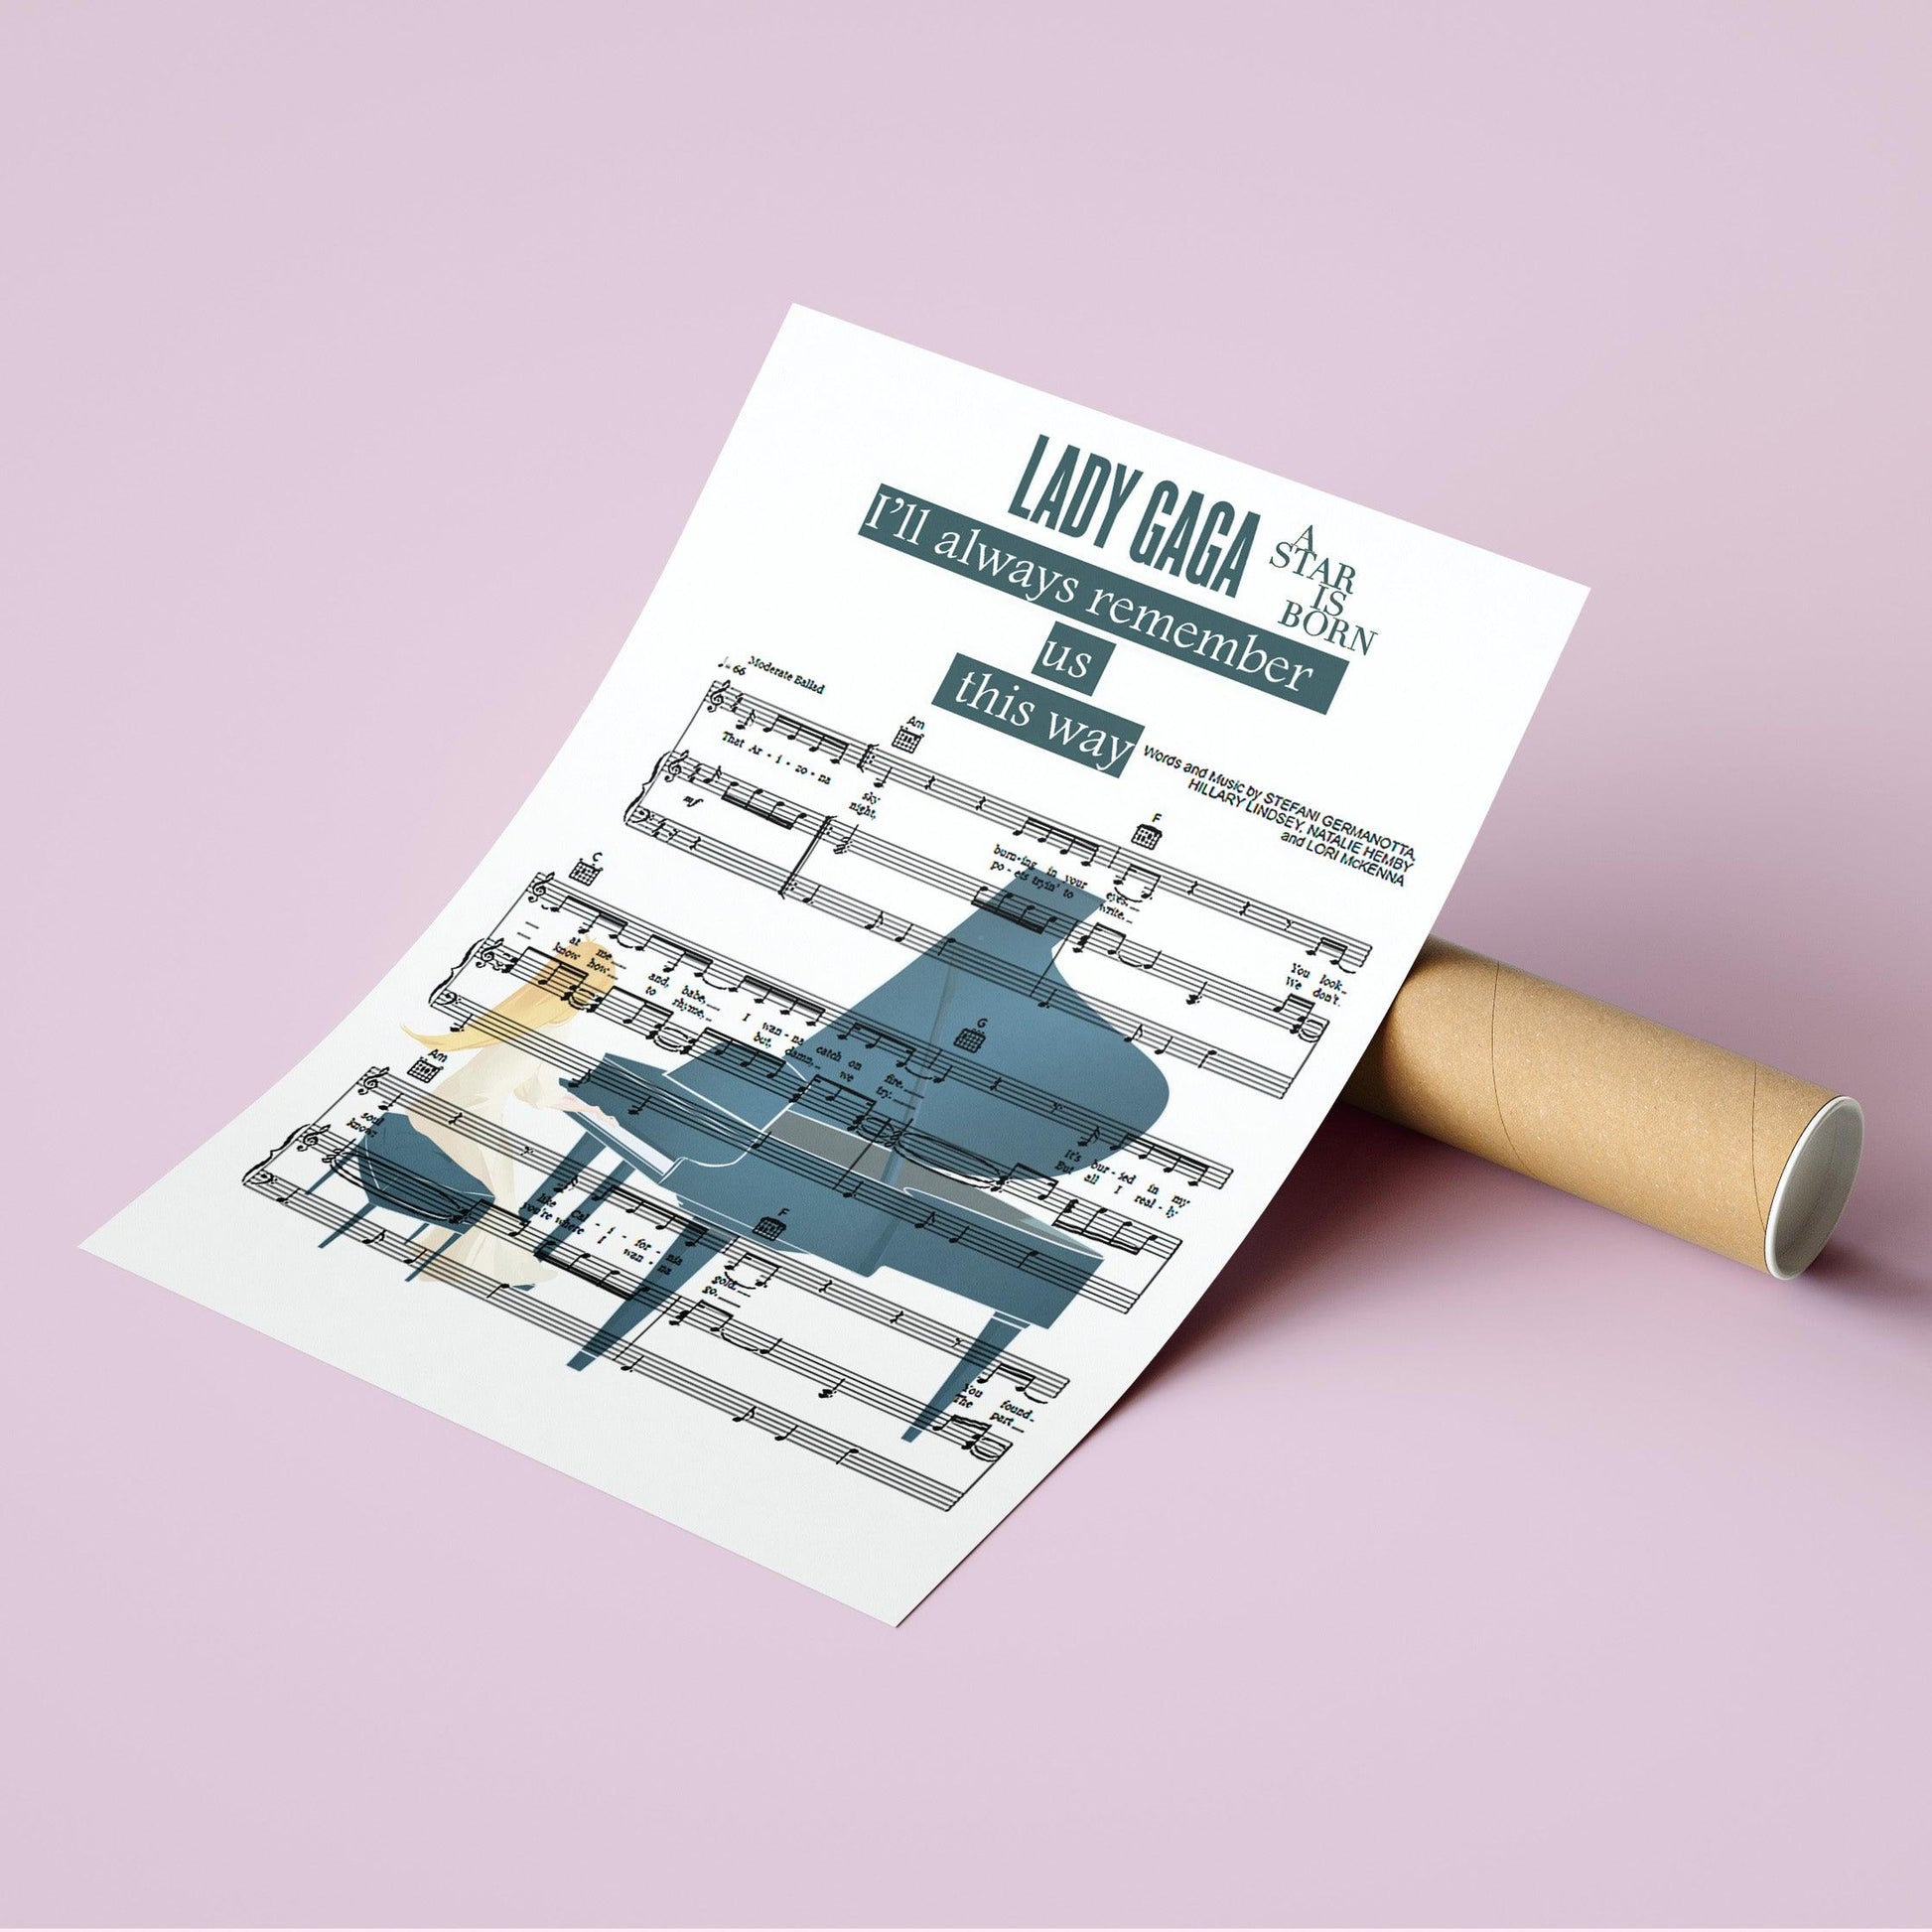 Lady Gaga - I'll Never Love Again Song Music Print | Song Music Sheet Notes Print Everyone has a favorite song especially Lady gaga, and now you can show the score as printed staff. The personal favorite song sheet print shows the song chosen as the score. 